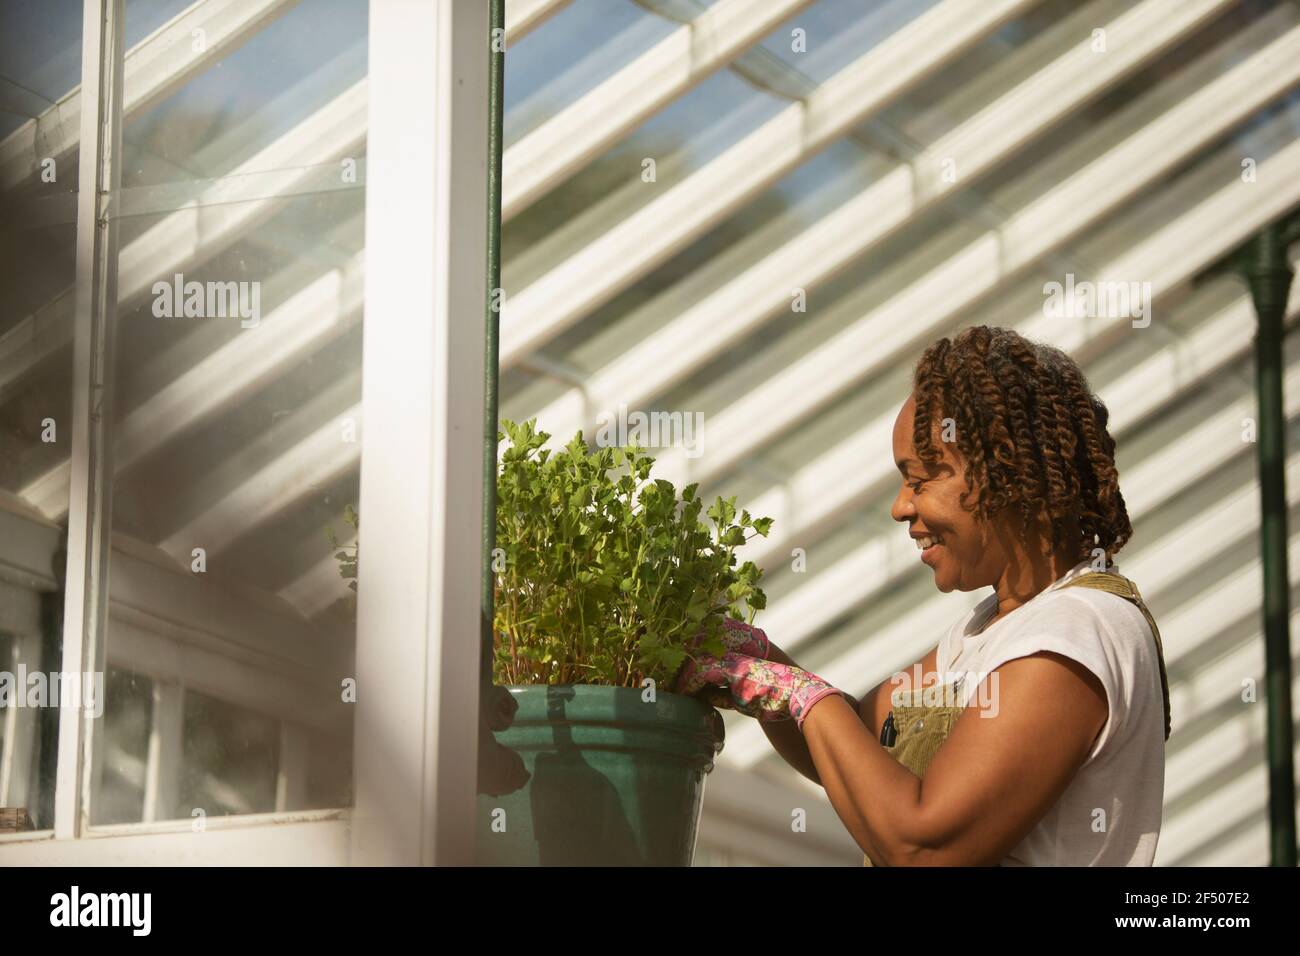 Female garden shop owner pruning potted plant in greenhouse Stock Photo